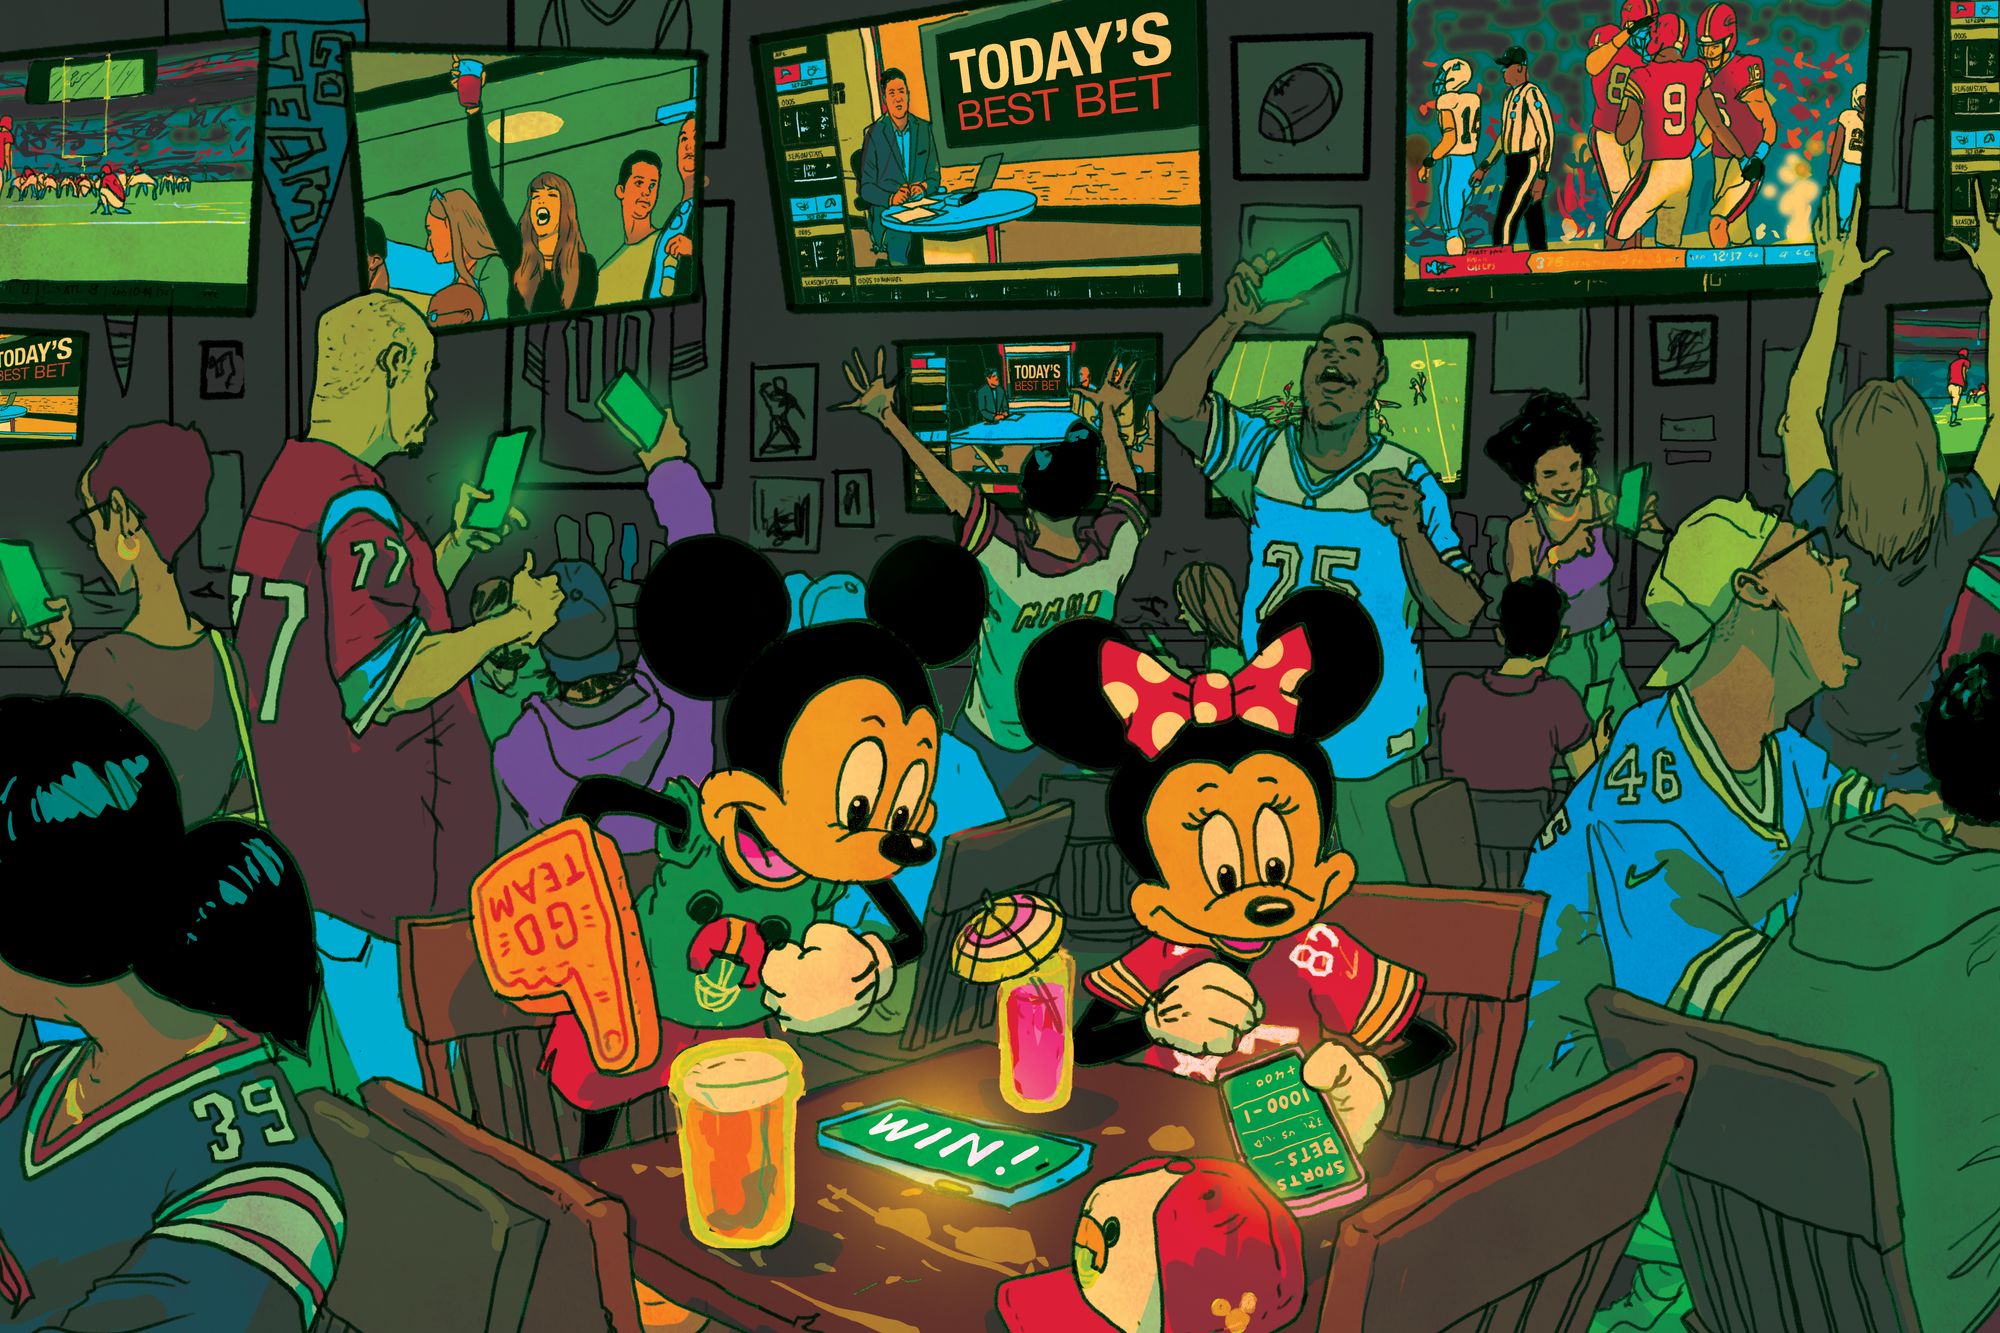 Mickey and Minnie Mouse gamble at a sports bar